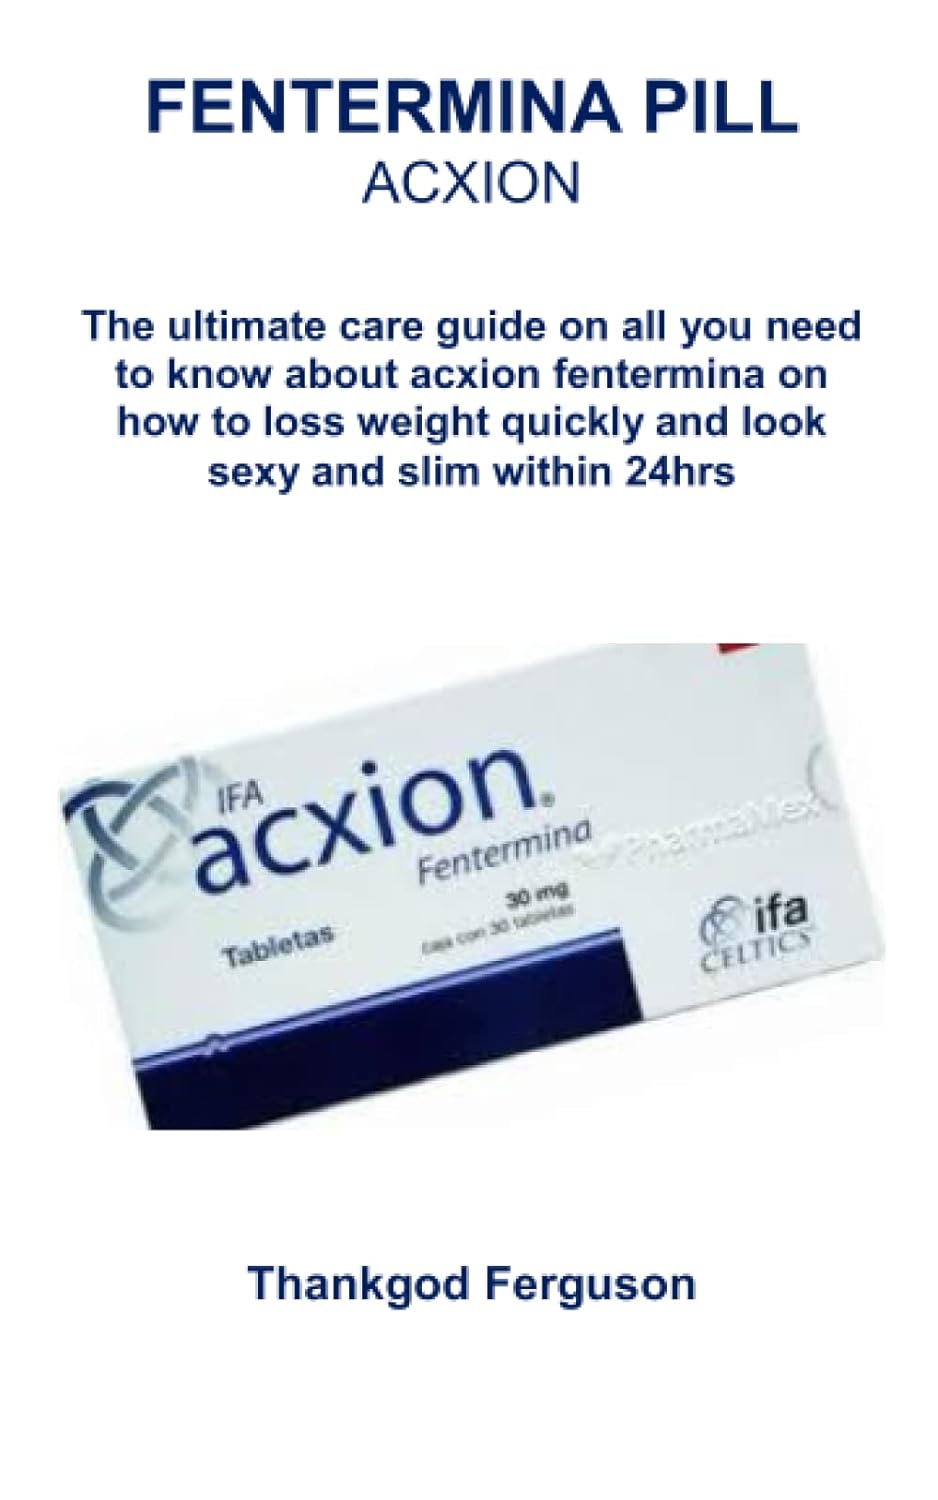 ACXION FENTERMINA PILL: The ultimate care guide on all you need to know about acxion fentermina on how to loss weight quickly and look sexy and slim within 24hrs     Paperback – May 19, 2023